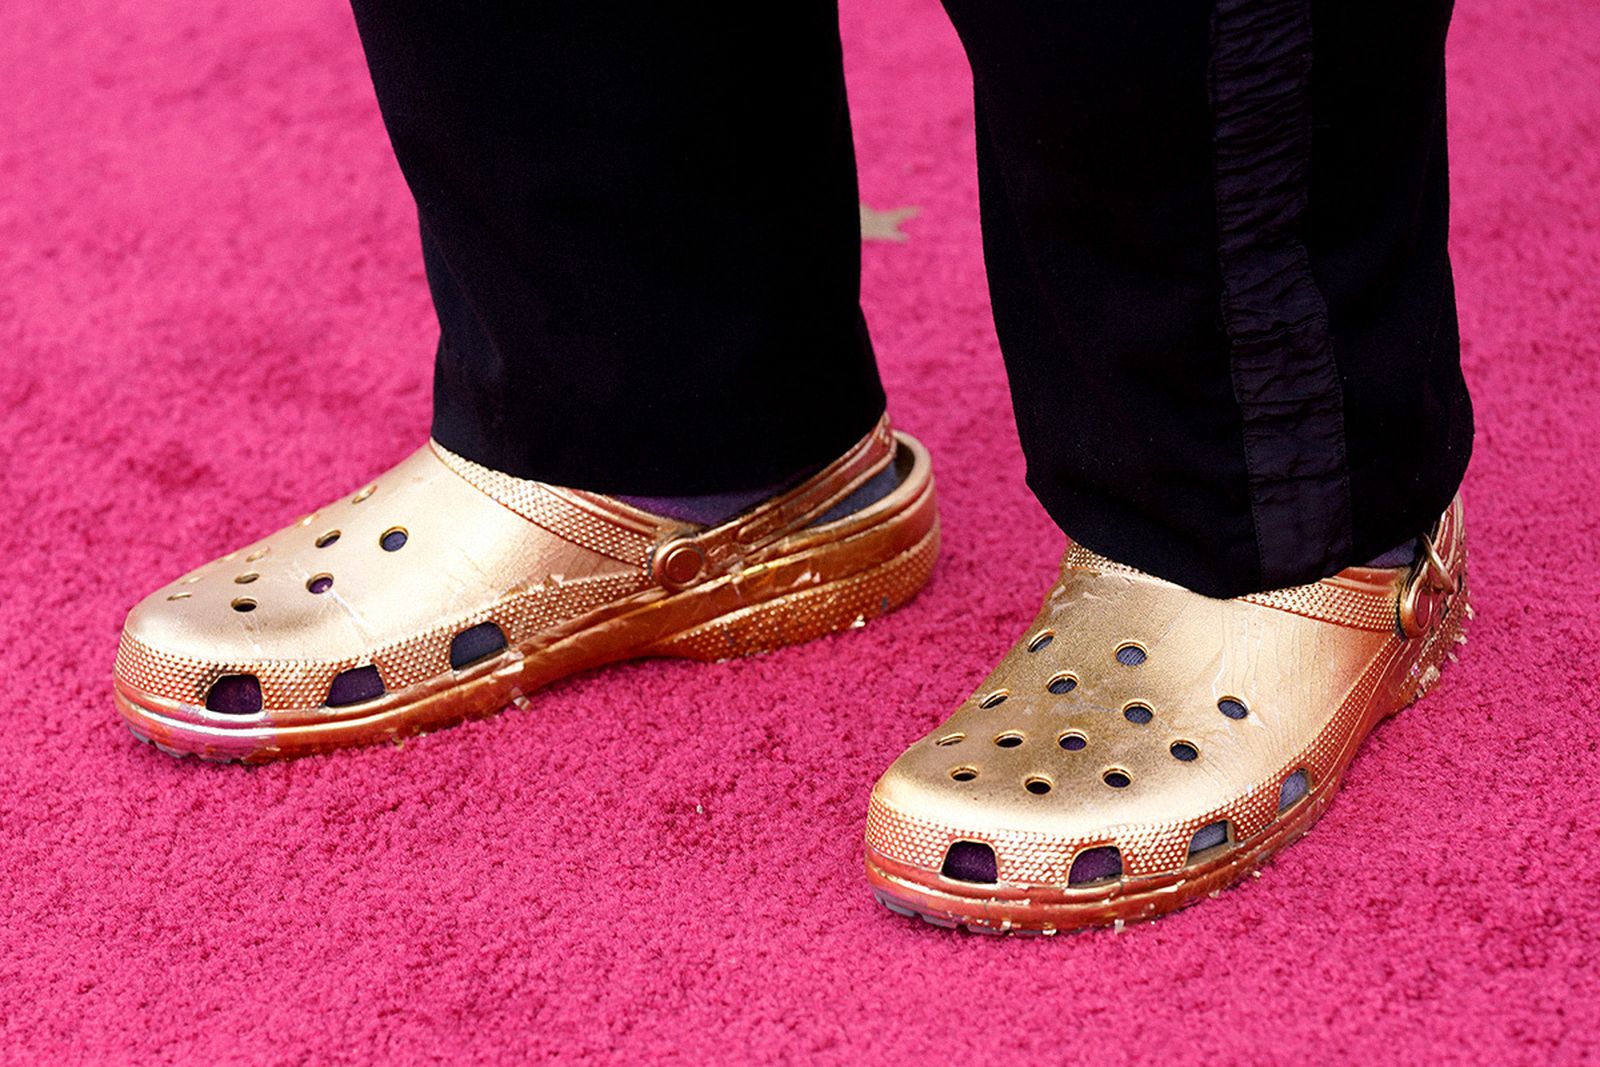 Questlove Wore Golden Crocs to the 2021 Oscars Red Carpet